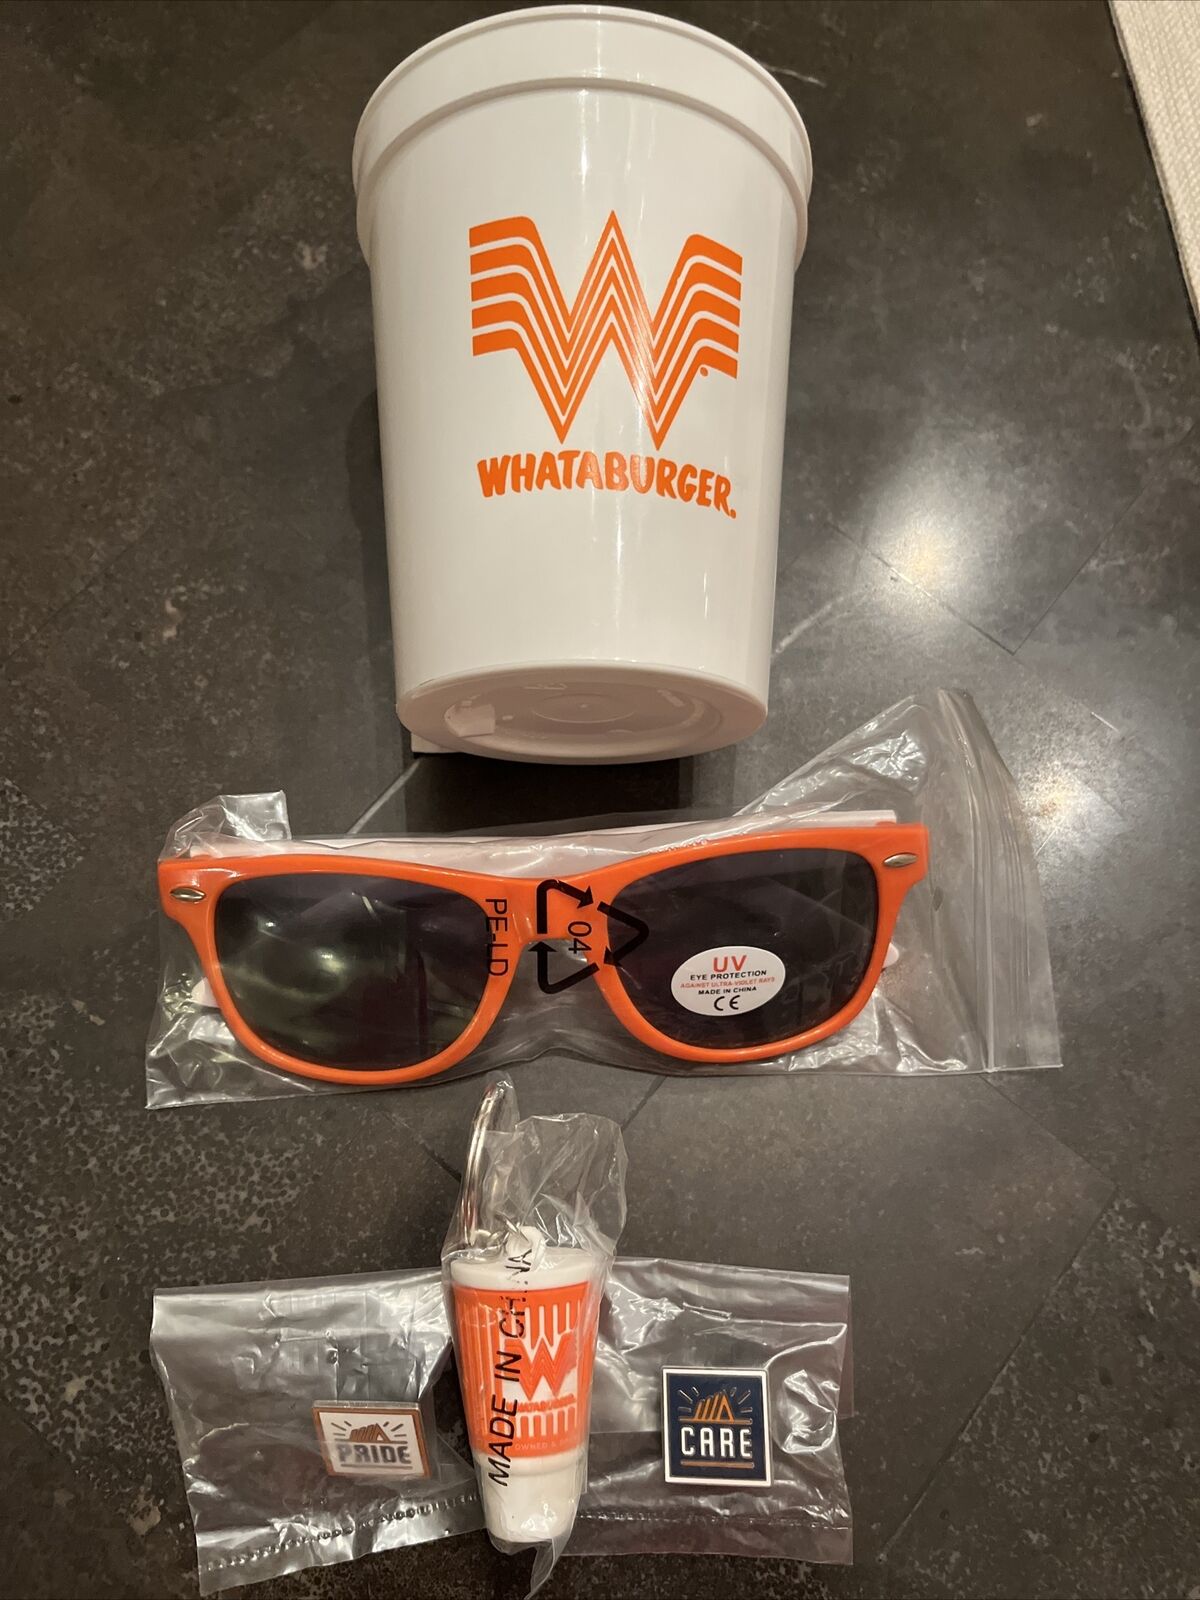 NEW Whataburger Sunglasses in wrapper, Whataburger Cup, Keychain, 2 Lapel Pins